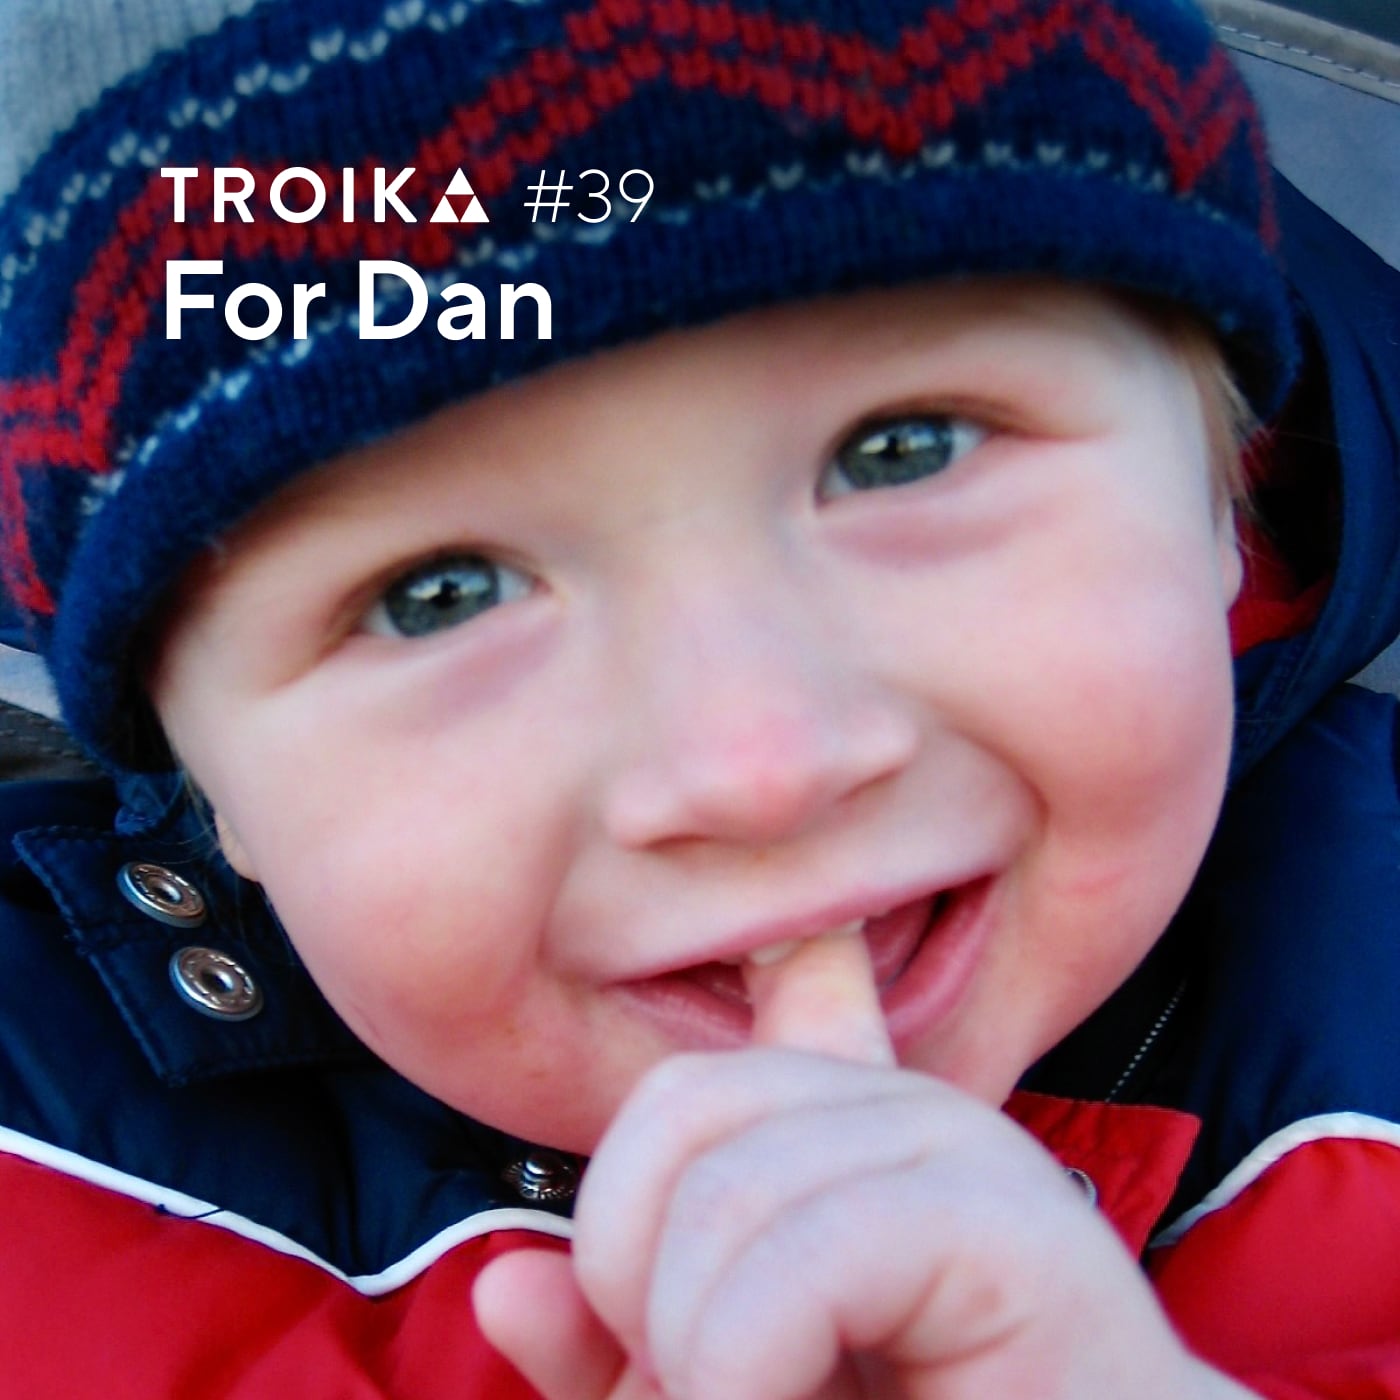 Troika #39: For Dan Dan when he was just two years old, with the photographer reflected in his twinkly eyes